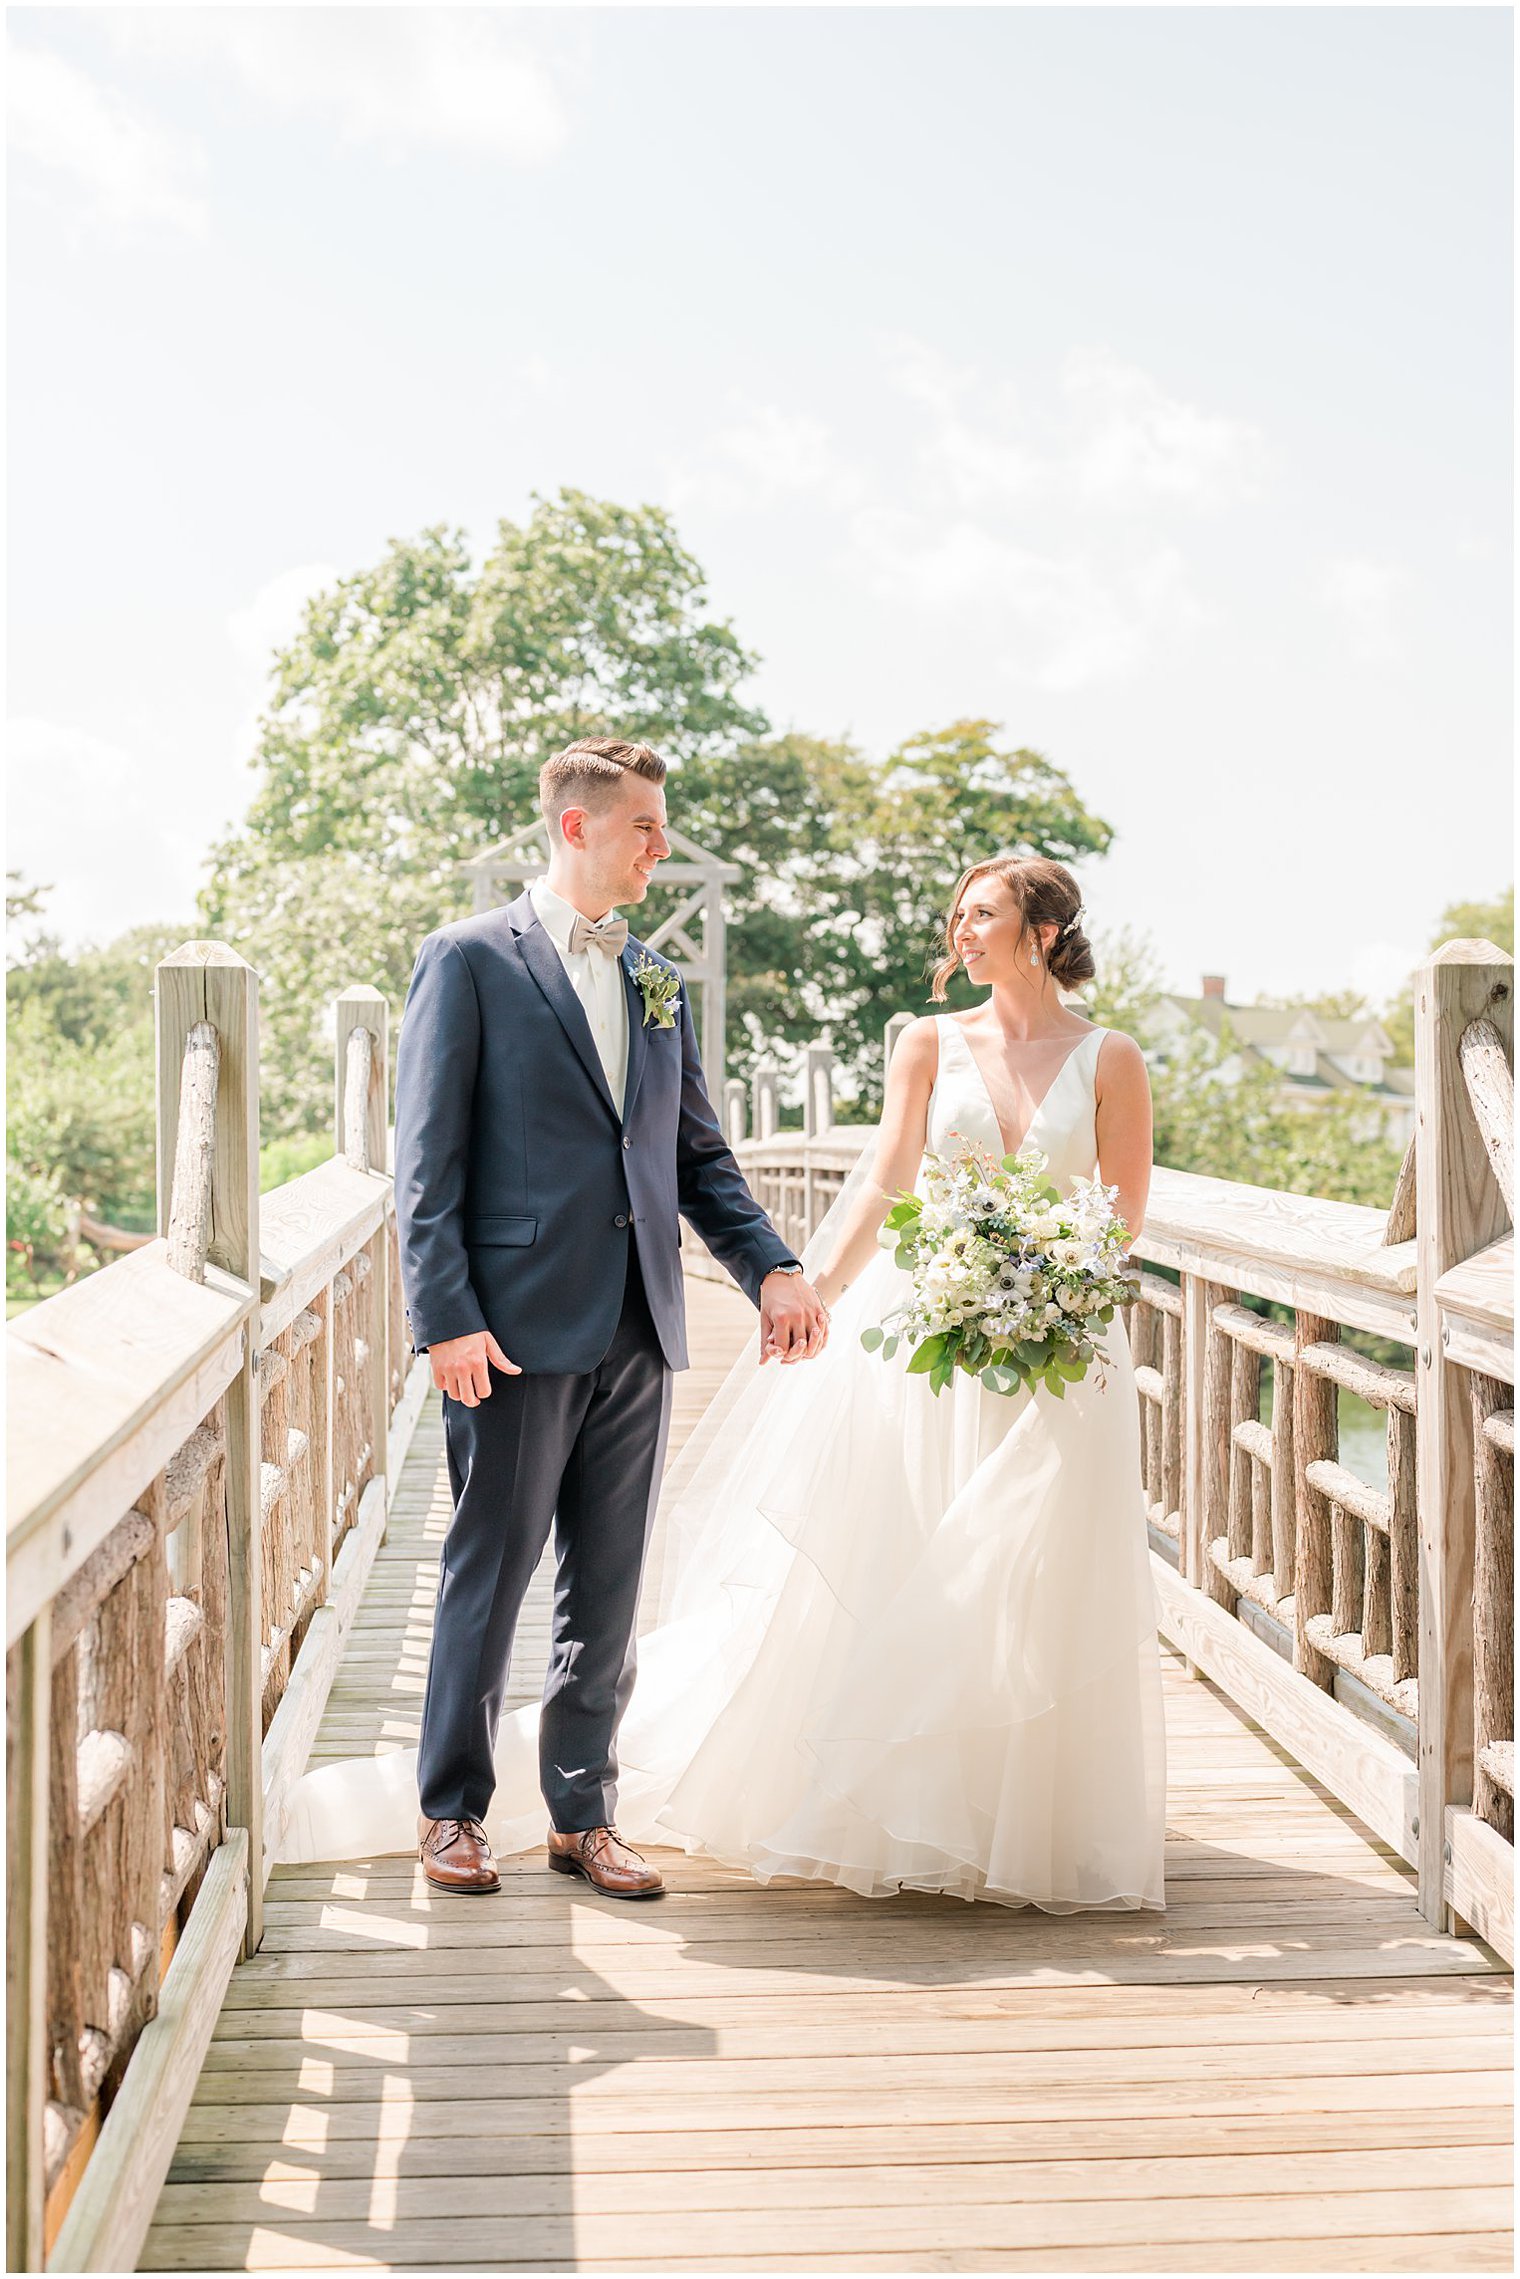 newlyweds hold hands walking on wooden bridge in New Jersey